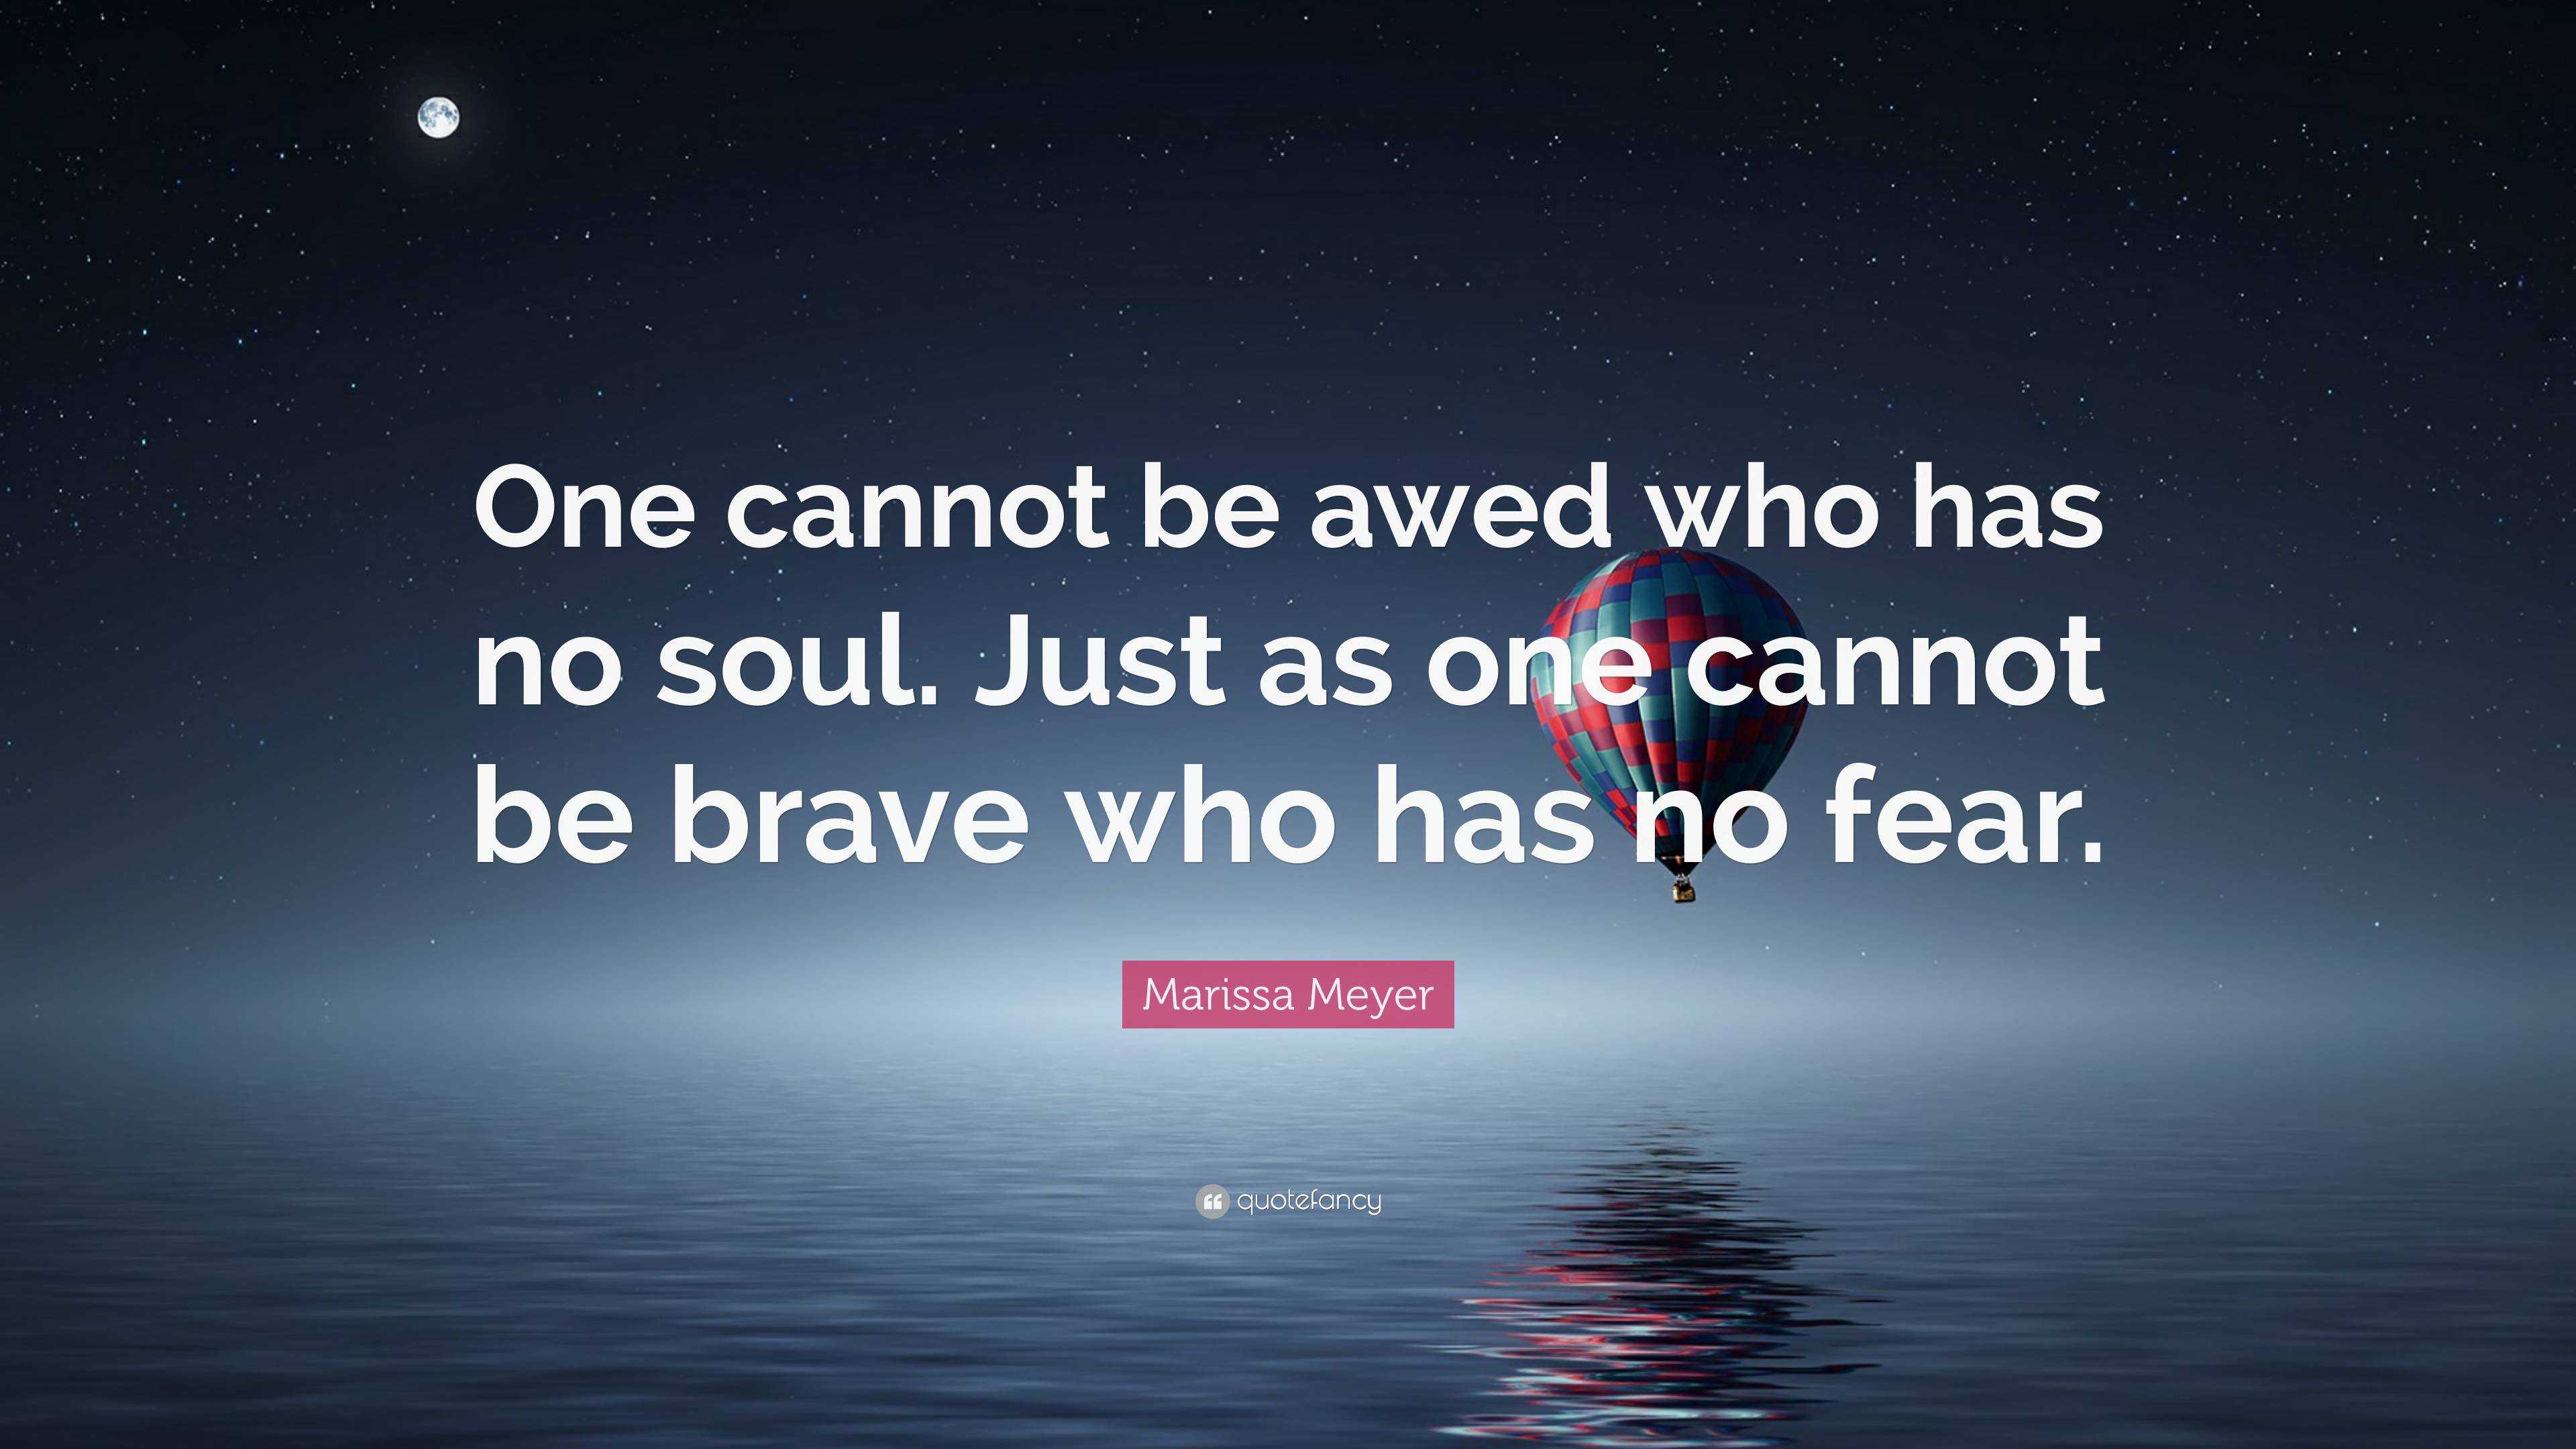 Marissa Meyer Quote: “One cannot be awed who has no soul. Just as one ...